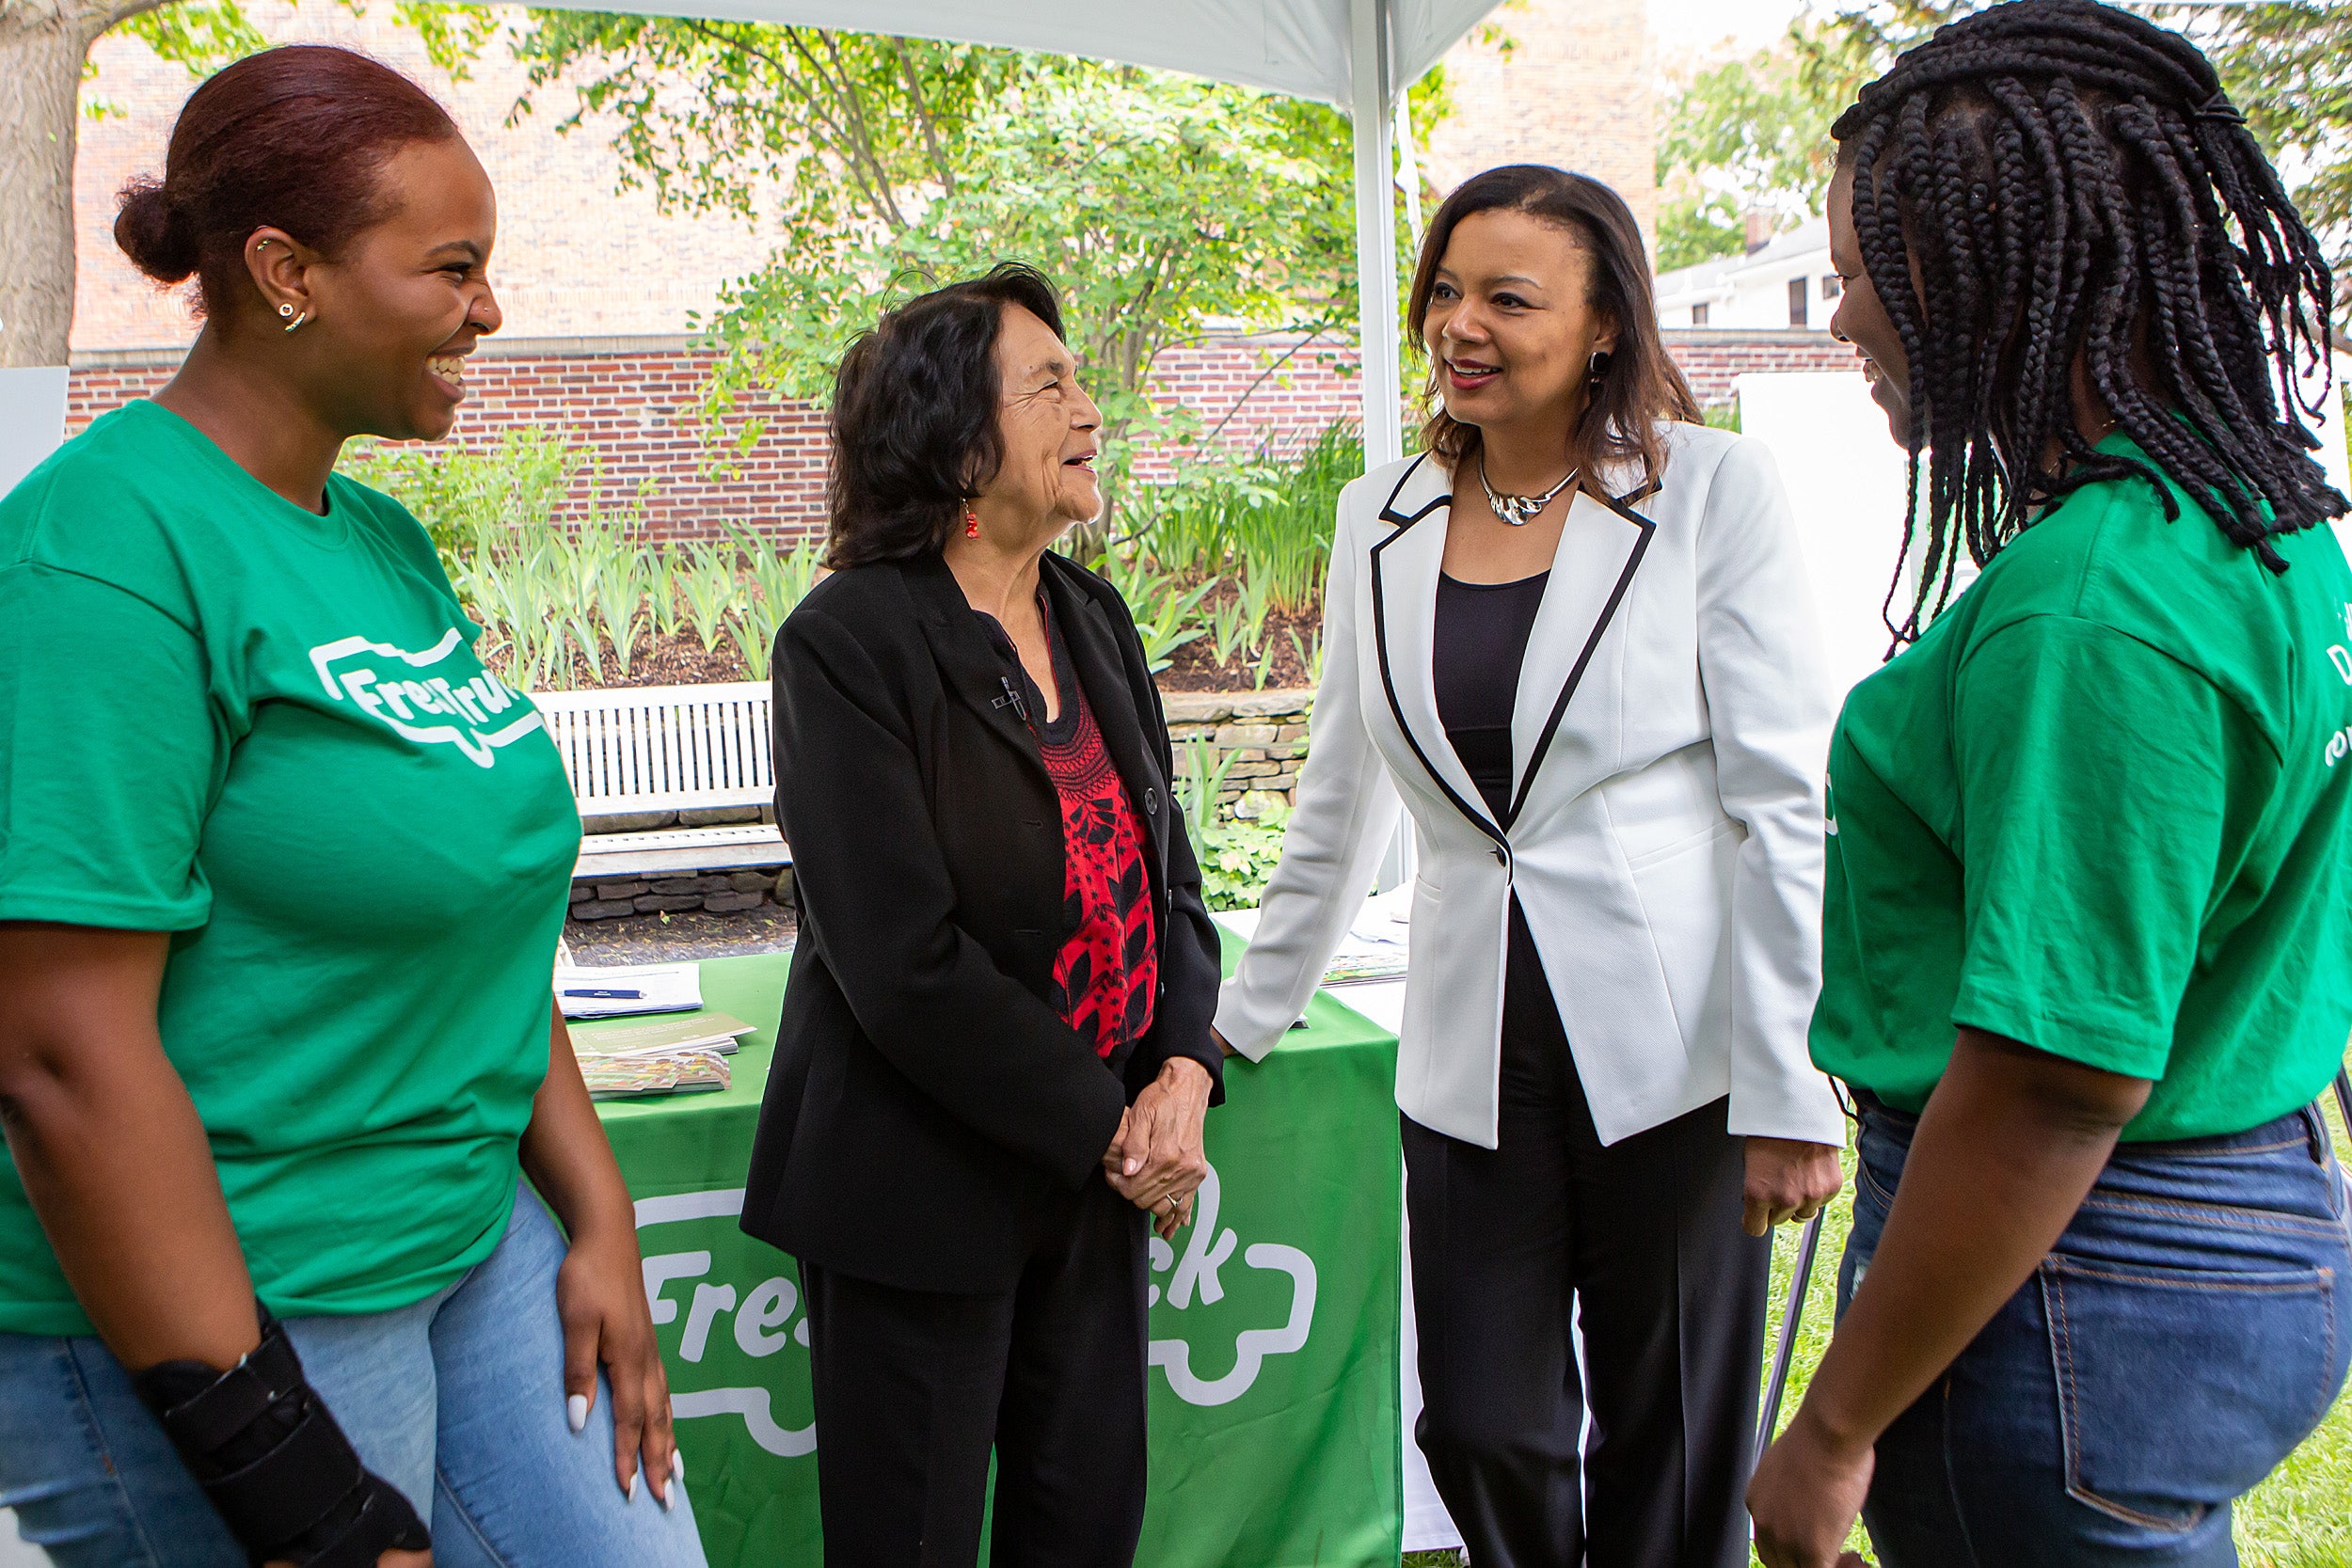 Dolores Huerta and Radcliffe Dean Tomiko Brown-Nagin are flanked by Fresh Truck's Raya Jackson (left) and Markiesha Duverneau.